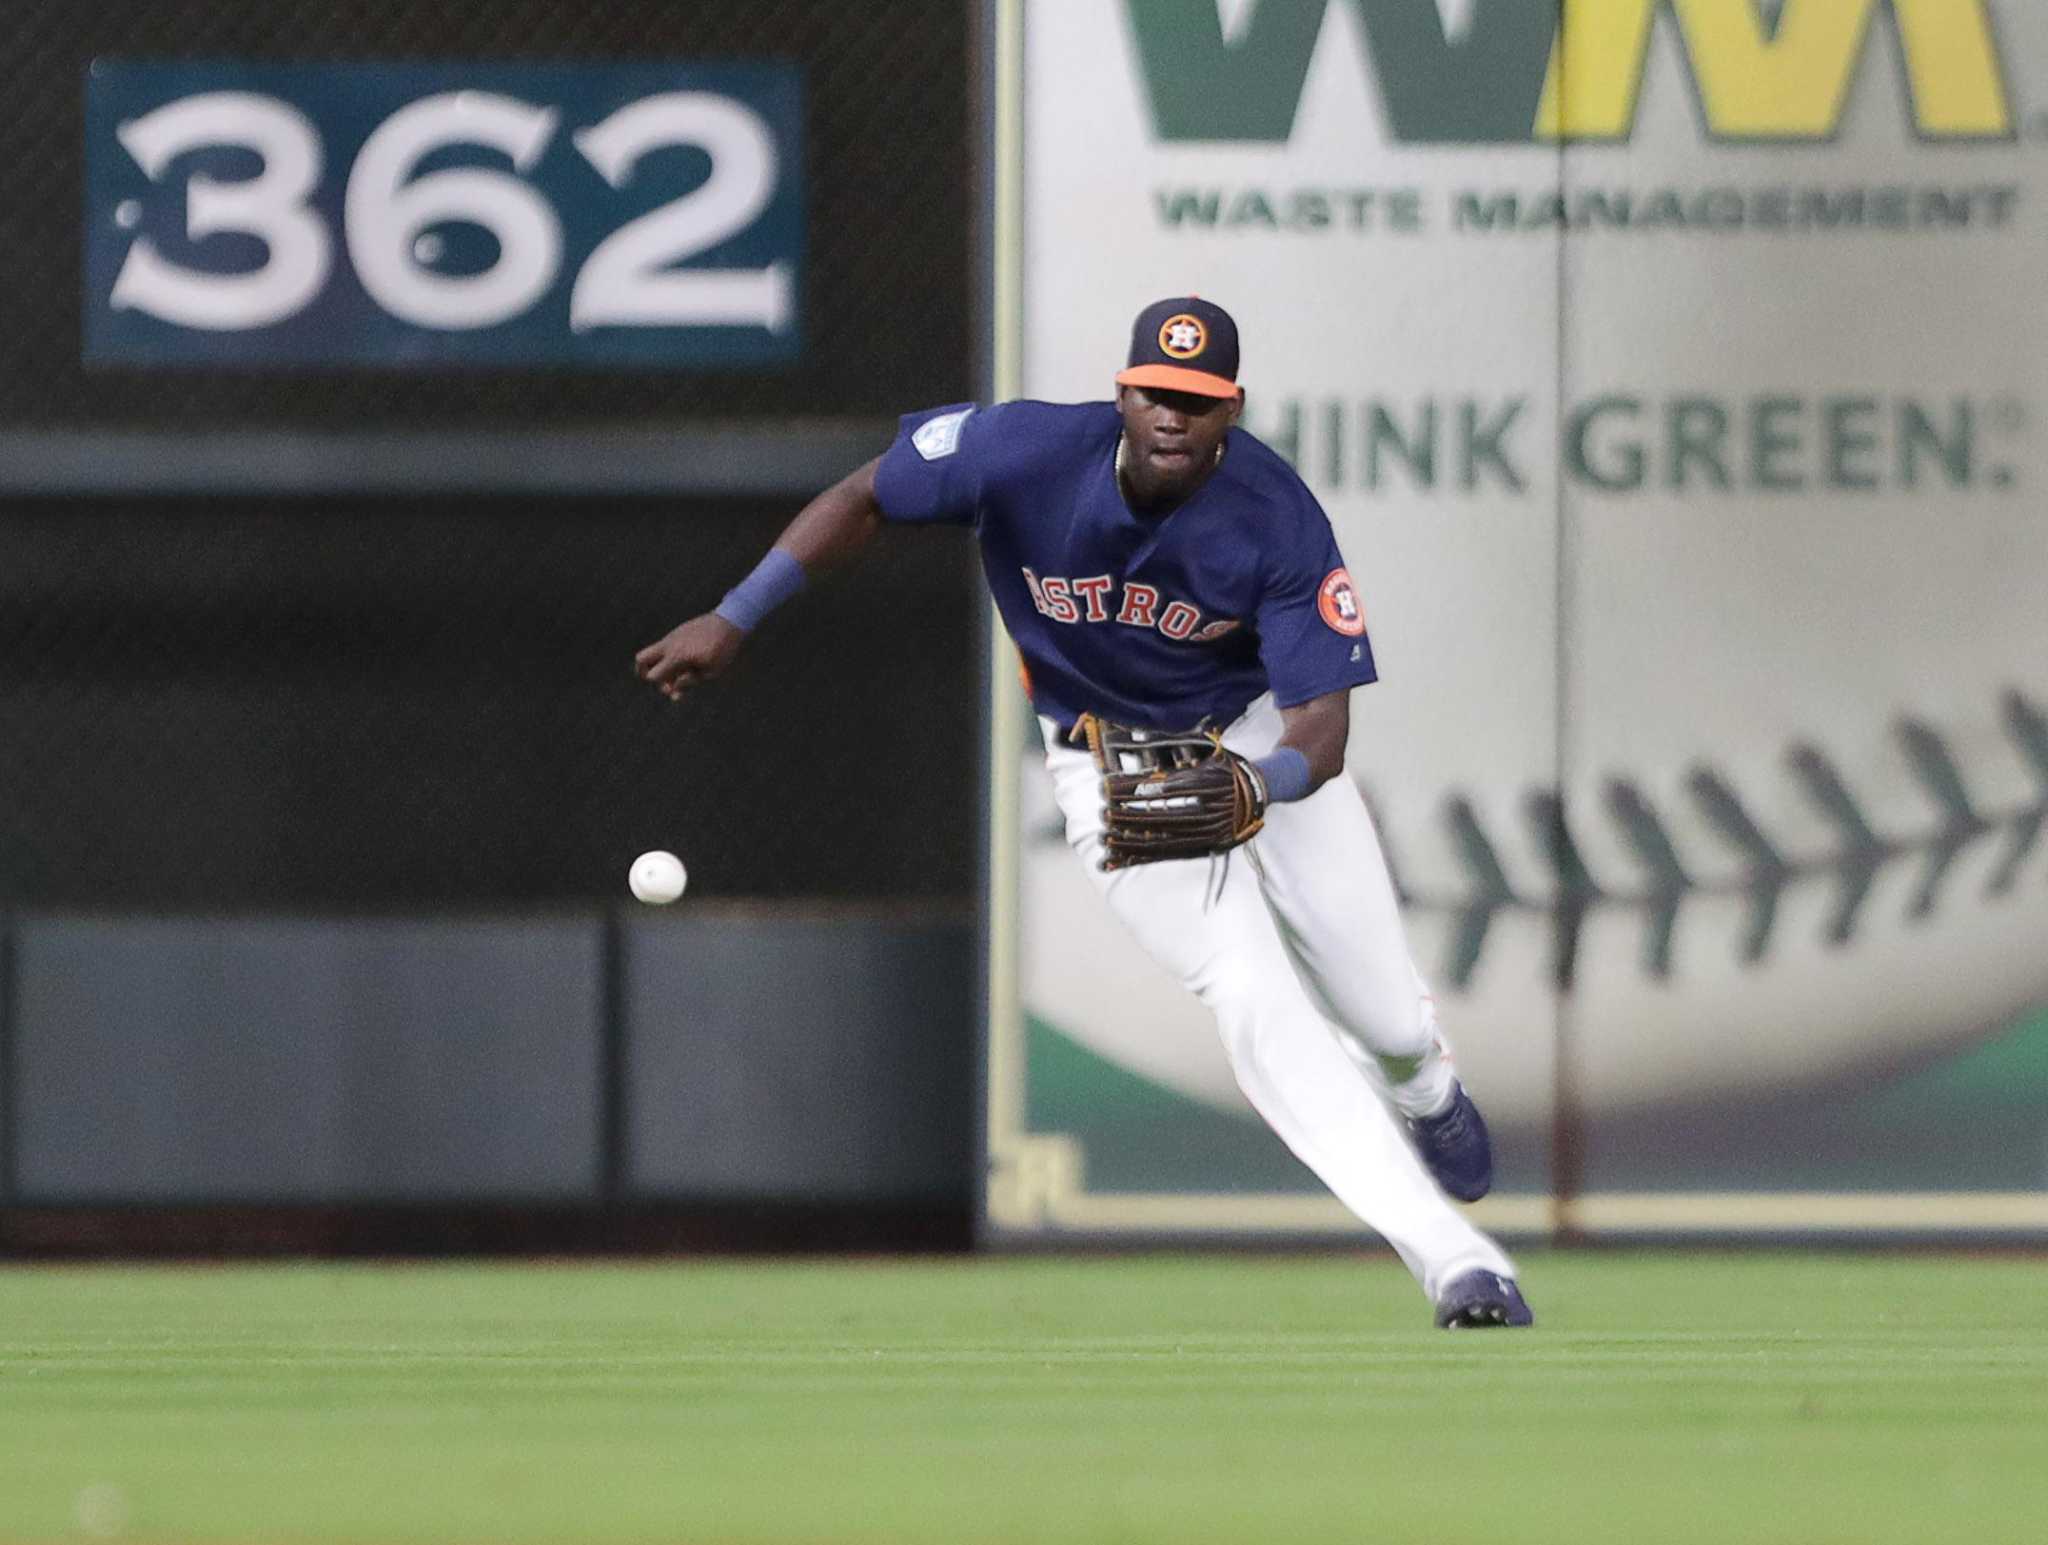 Up next for Yordan Alvarez: learning to play left field